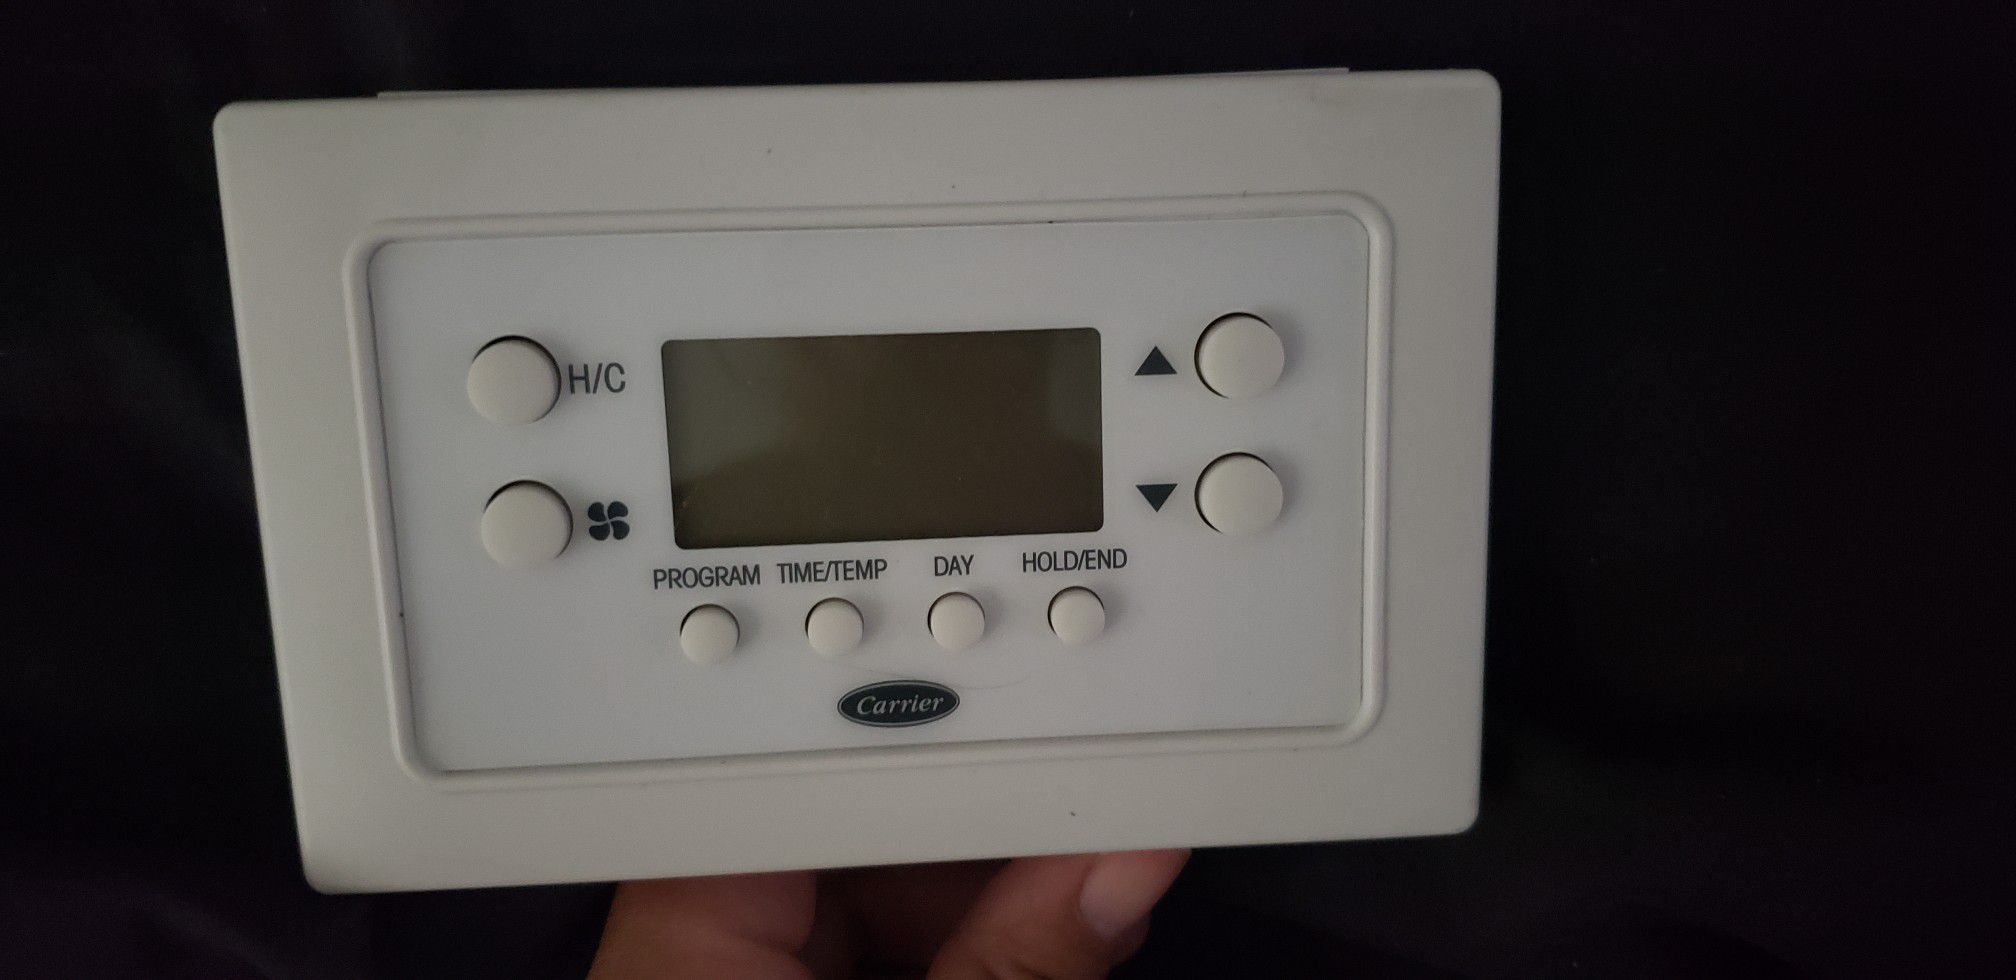 Carrier programmable thermostat